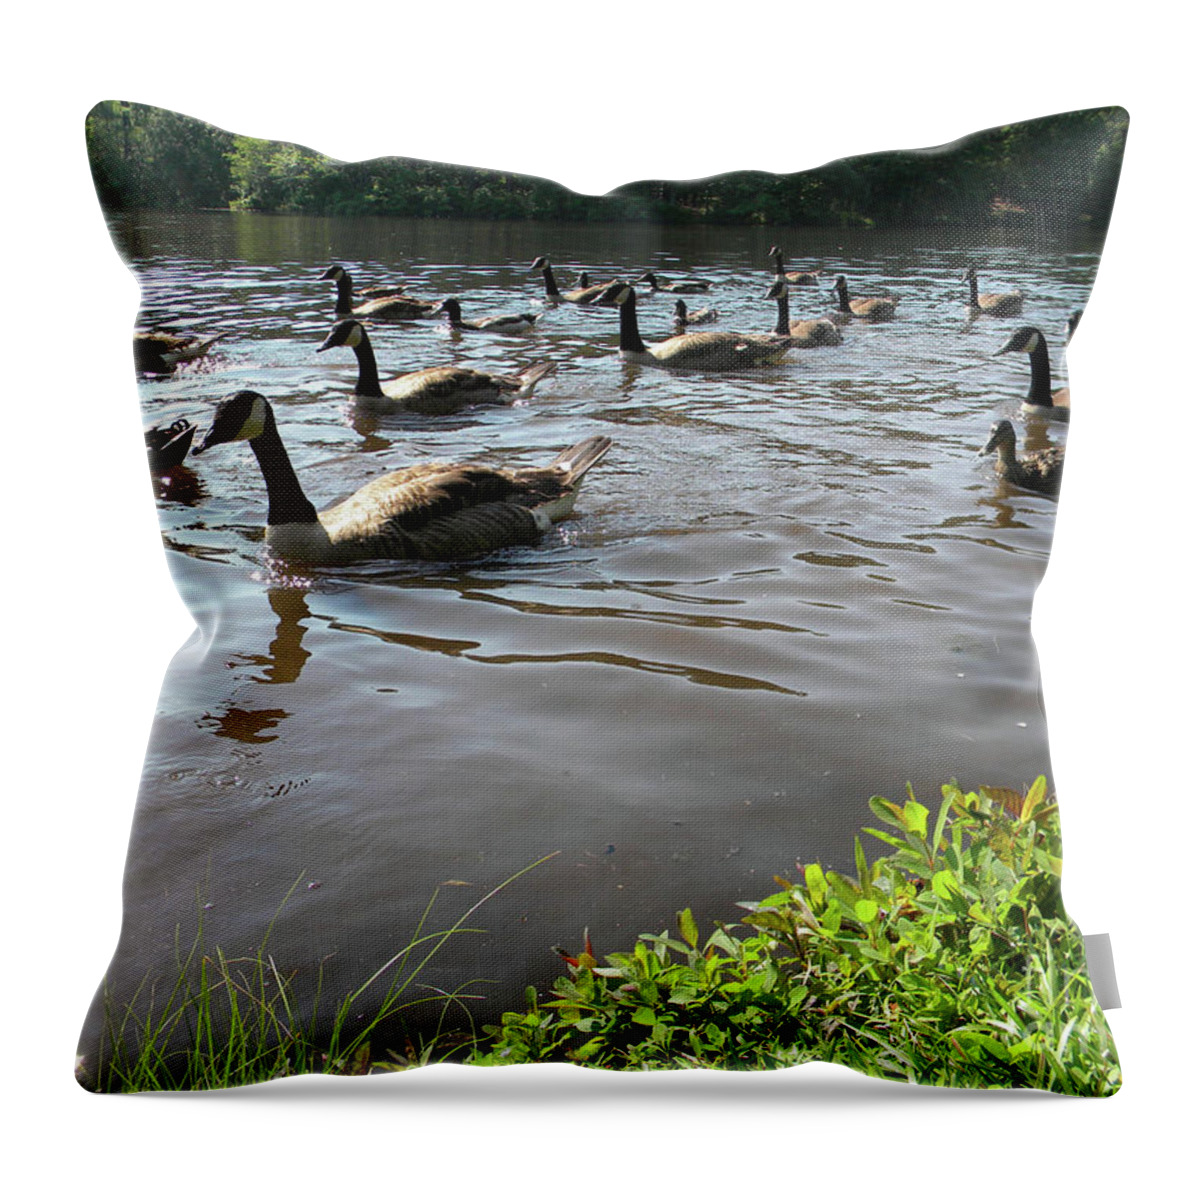 Geease Throw Pillow featuring the photograph Breakfast Time by Matthew Seufer